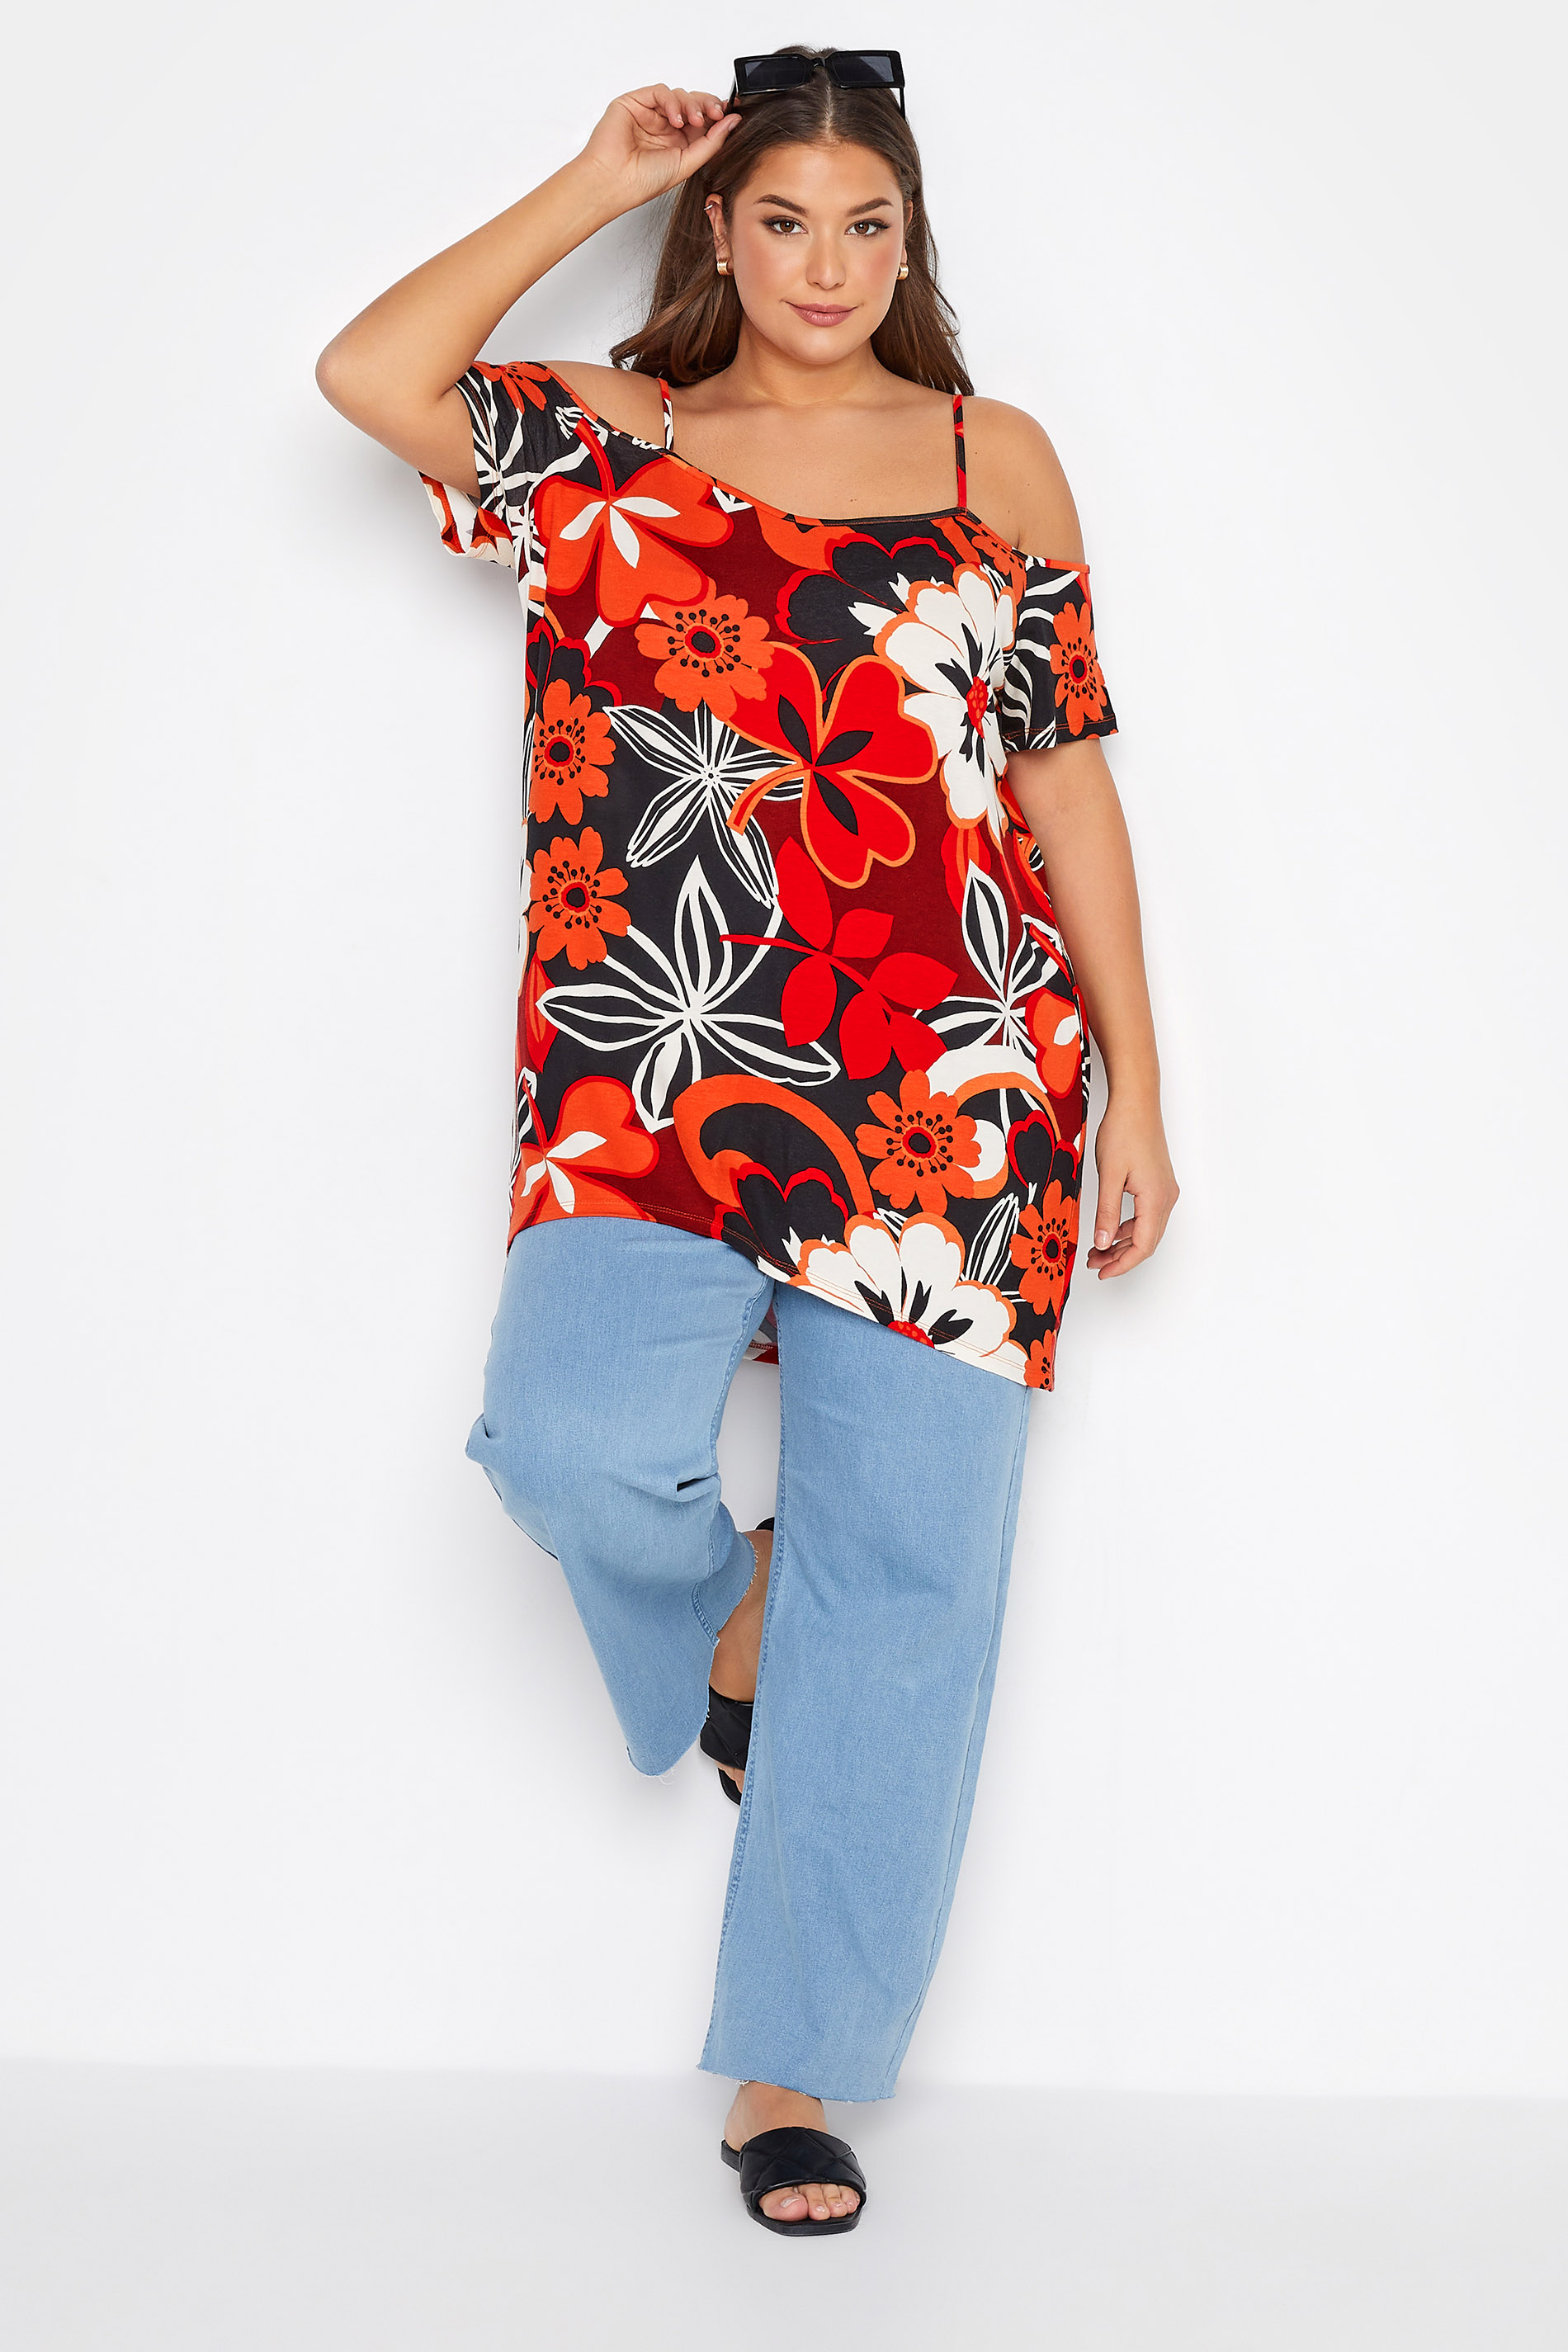 Grande taille  Tops Grande taille  Tops Épaules Ajourées & Style Bardot | Top Rouge Tropical Floral Style Bardot - GS44934